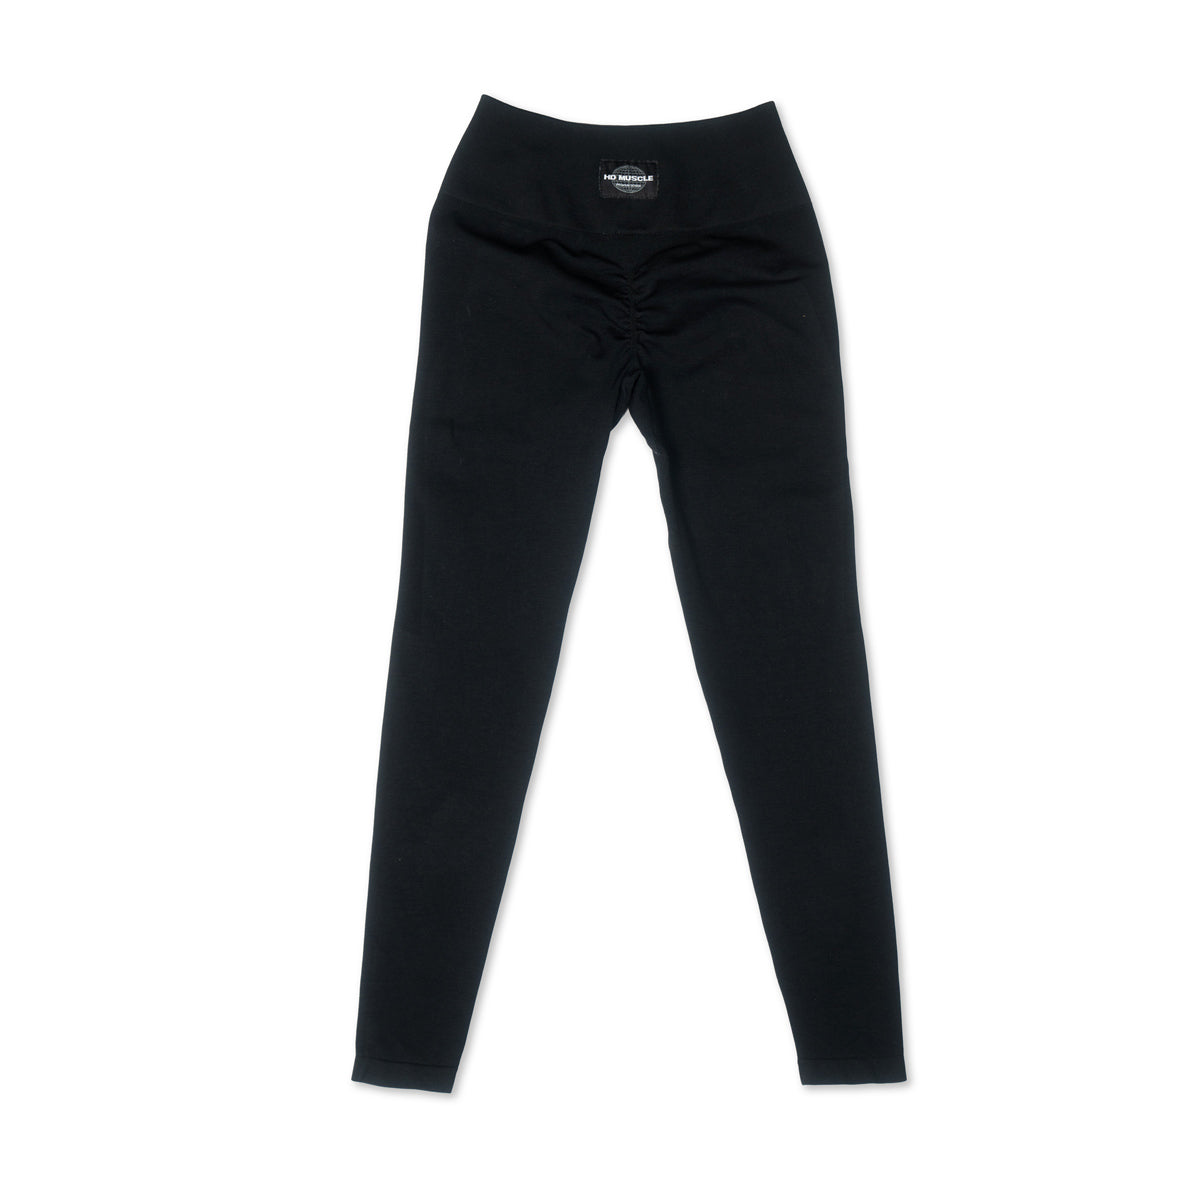 NEW Soft Surroundings The Ultimate Cropped Legging Pants Black 2DH86 LARGE  14-16